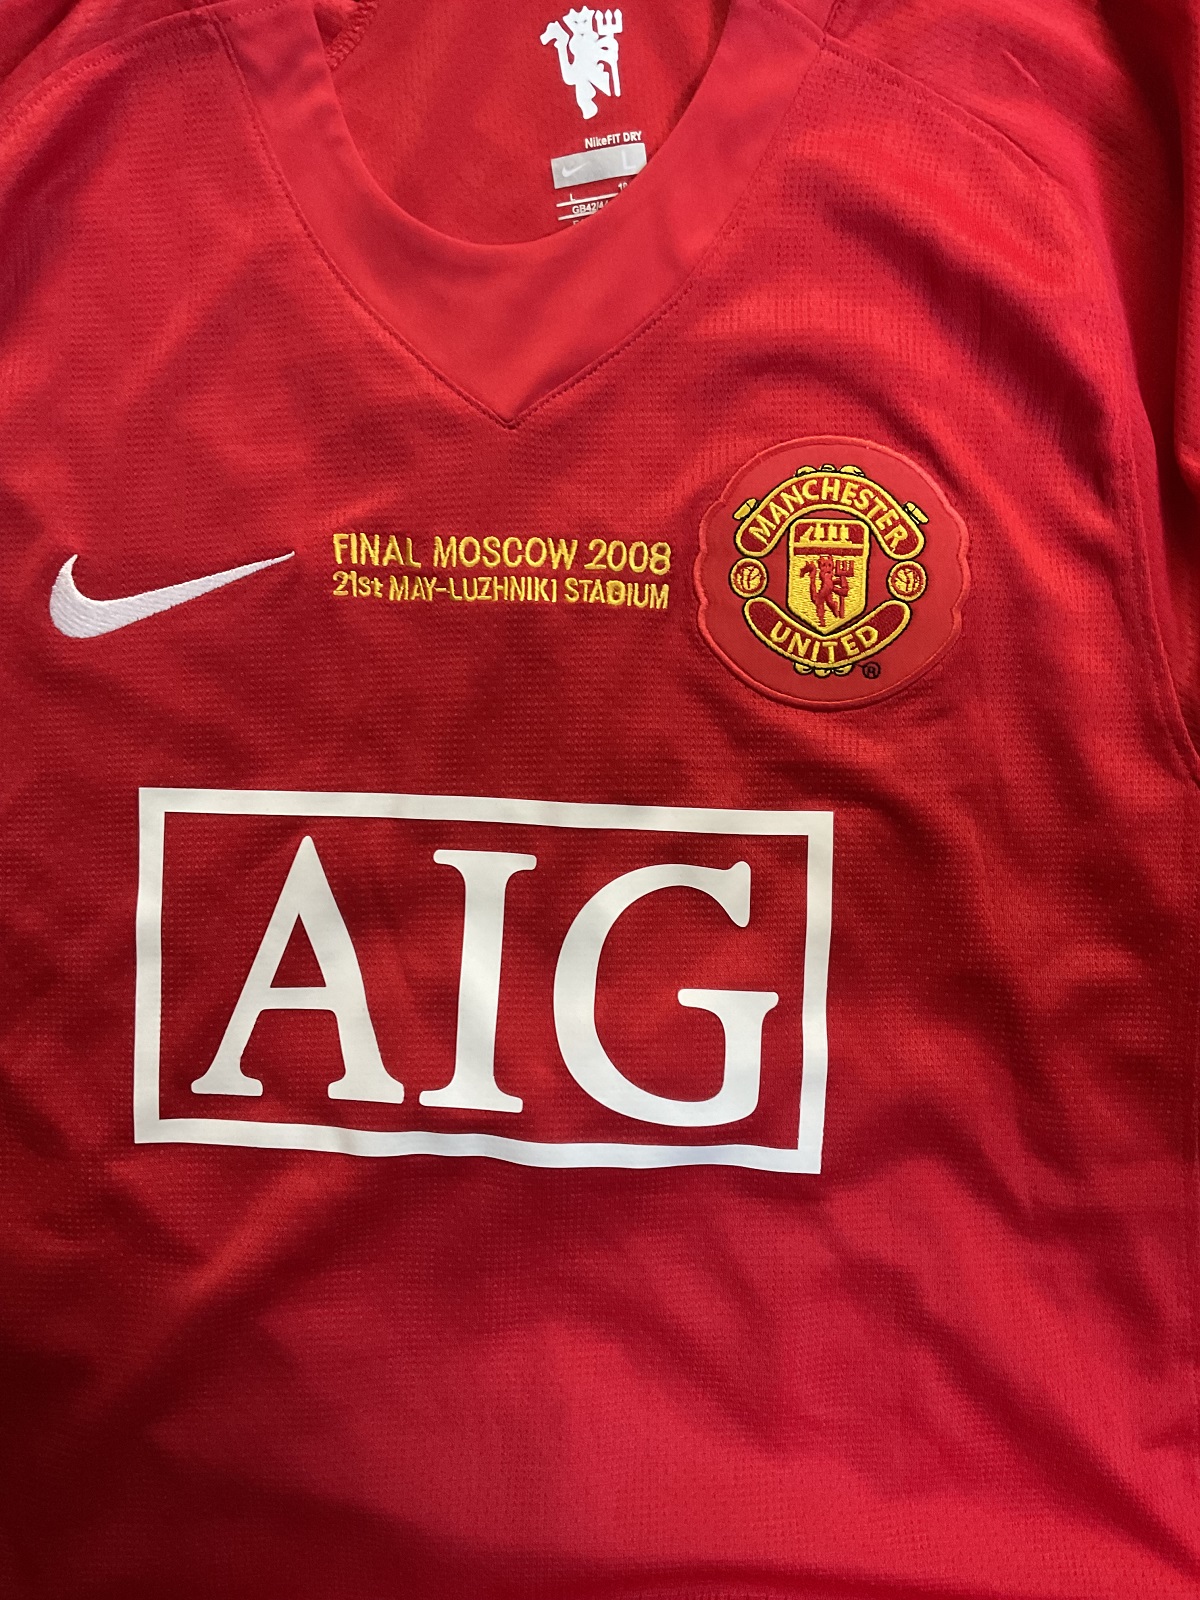 Manchester United Legend Paul Scholes Hand signed Nike Manchester United Shirt from the Final in - Image 3 of 3